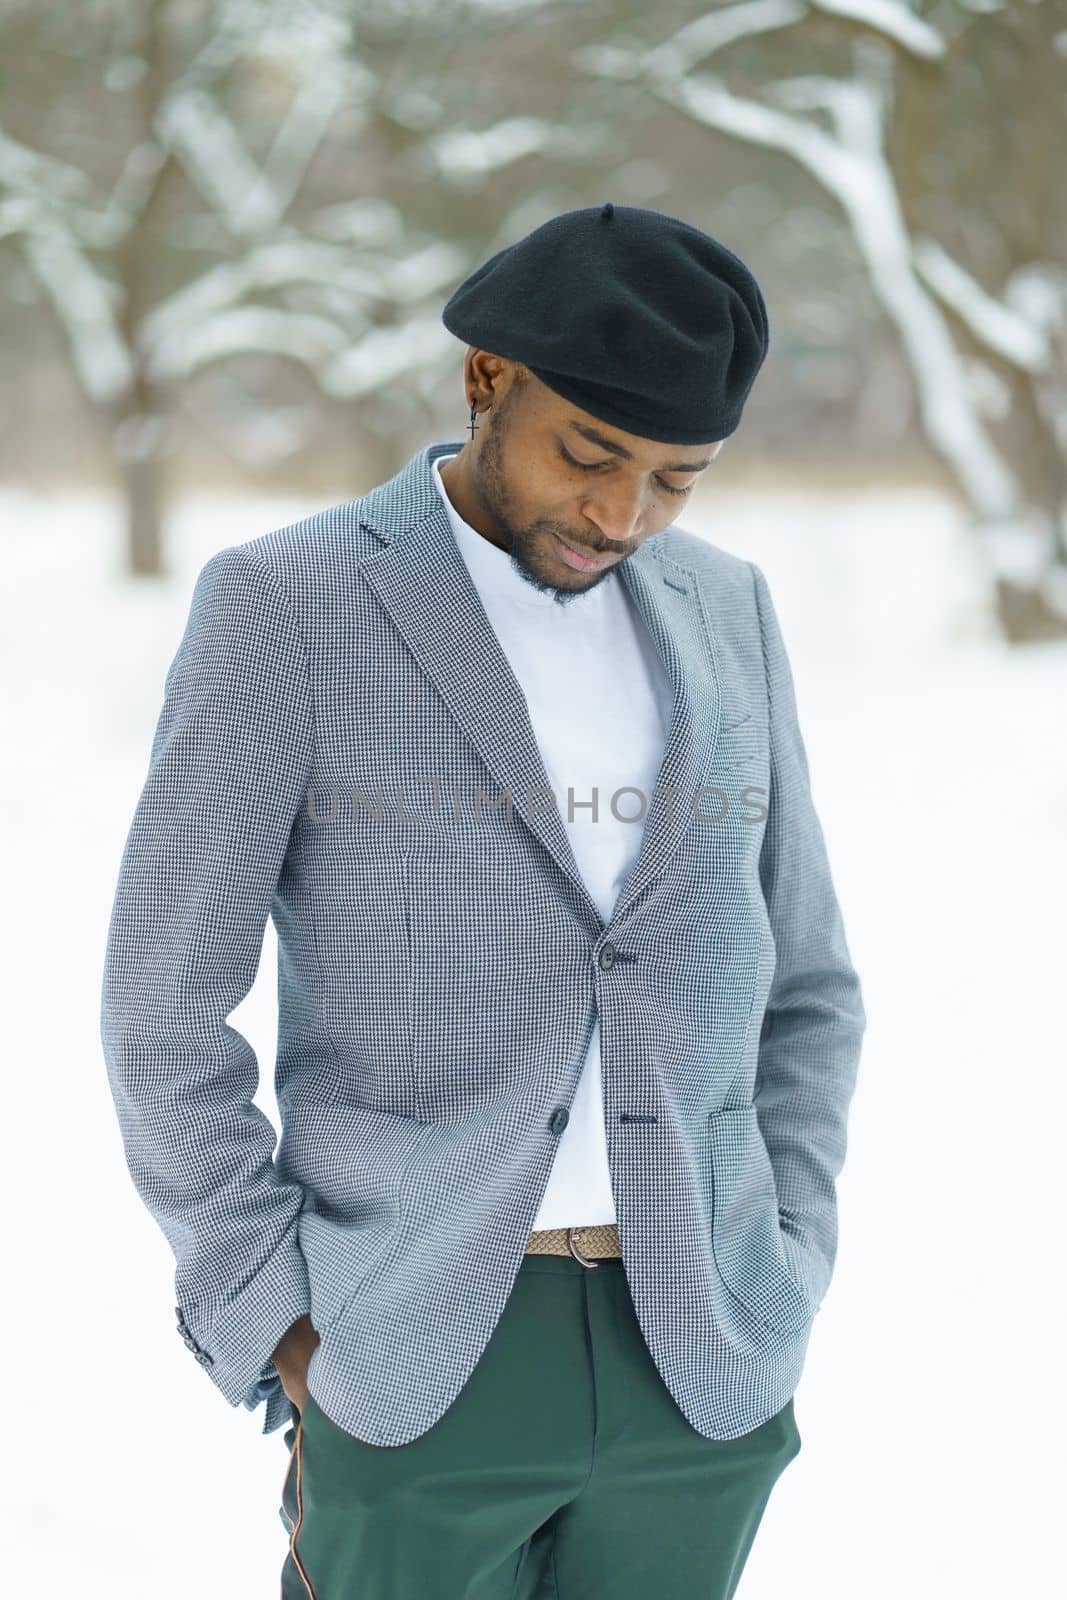 Sad african man stay in winter in snowy park. Young man in beret posing for camera outdoor. by LipikStockMedia